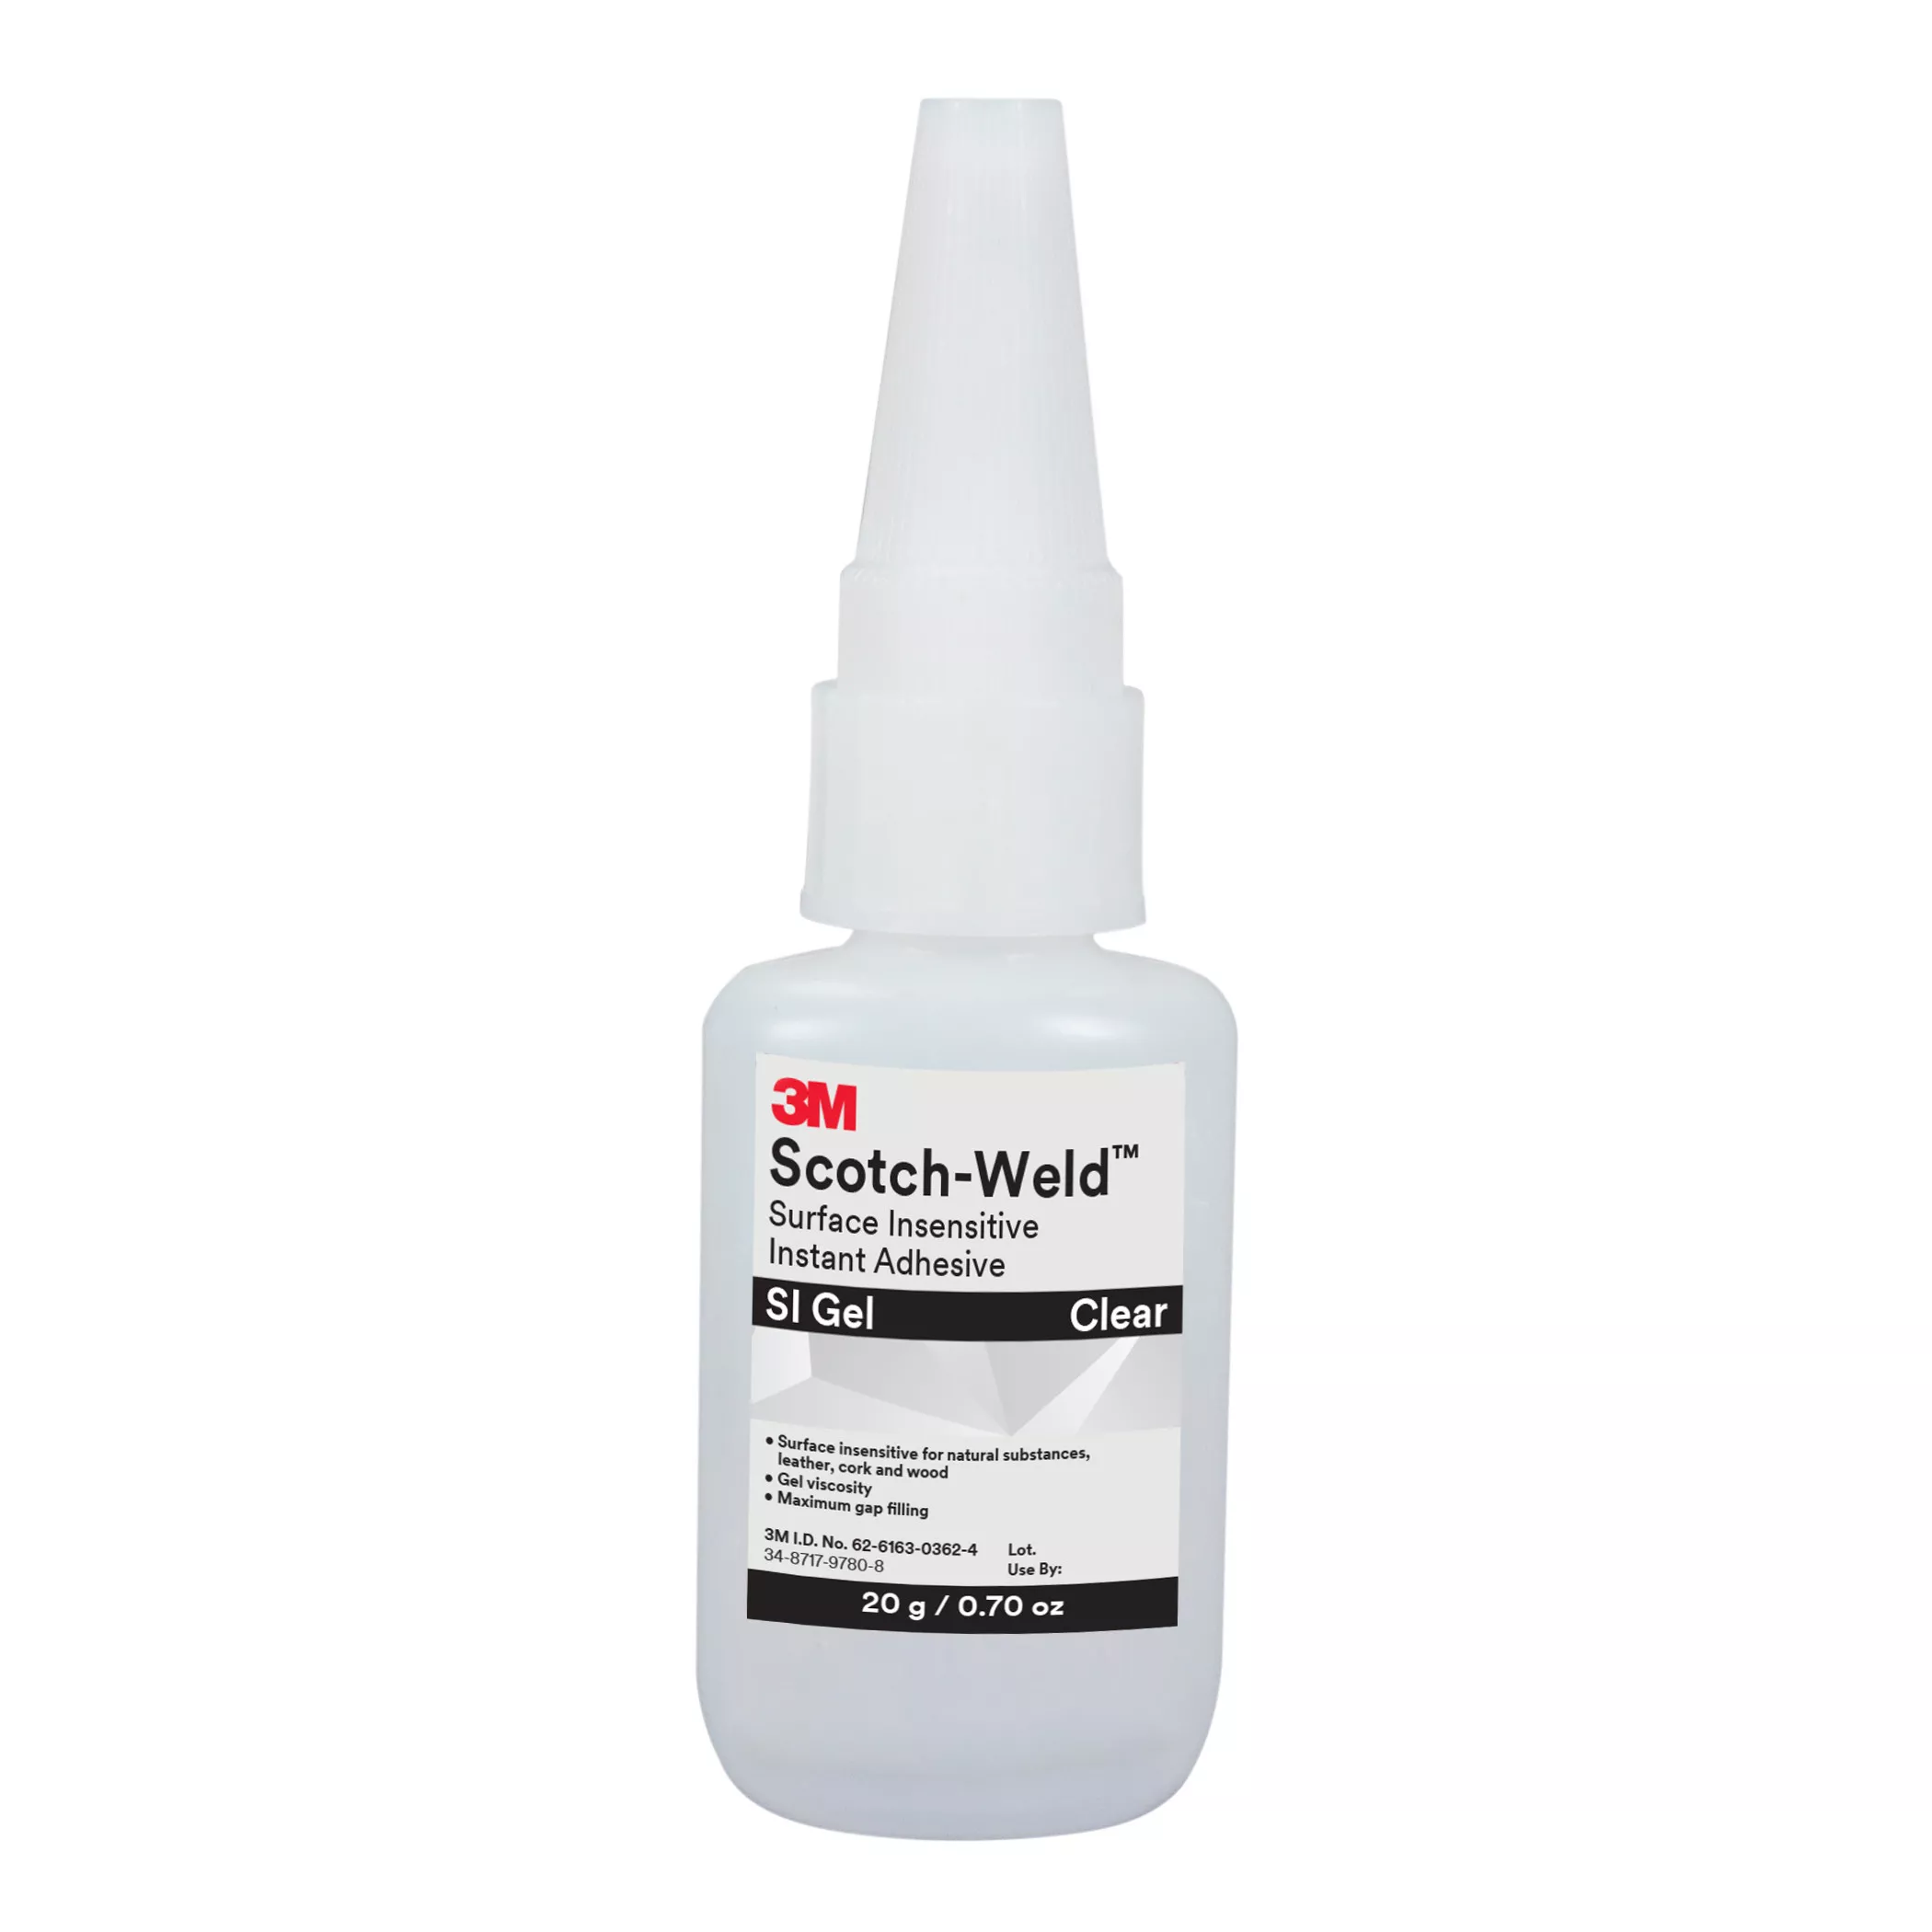 3M™ Scotch-Weld™ Surface Insensitive Instant Adhesive SI Gel, Clear, 20
Gram, 10/Case